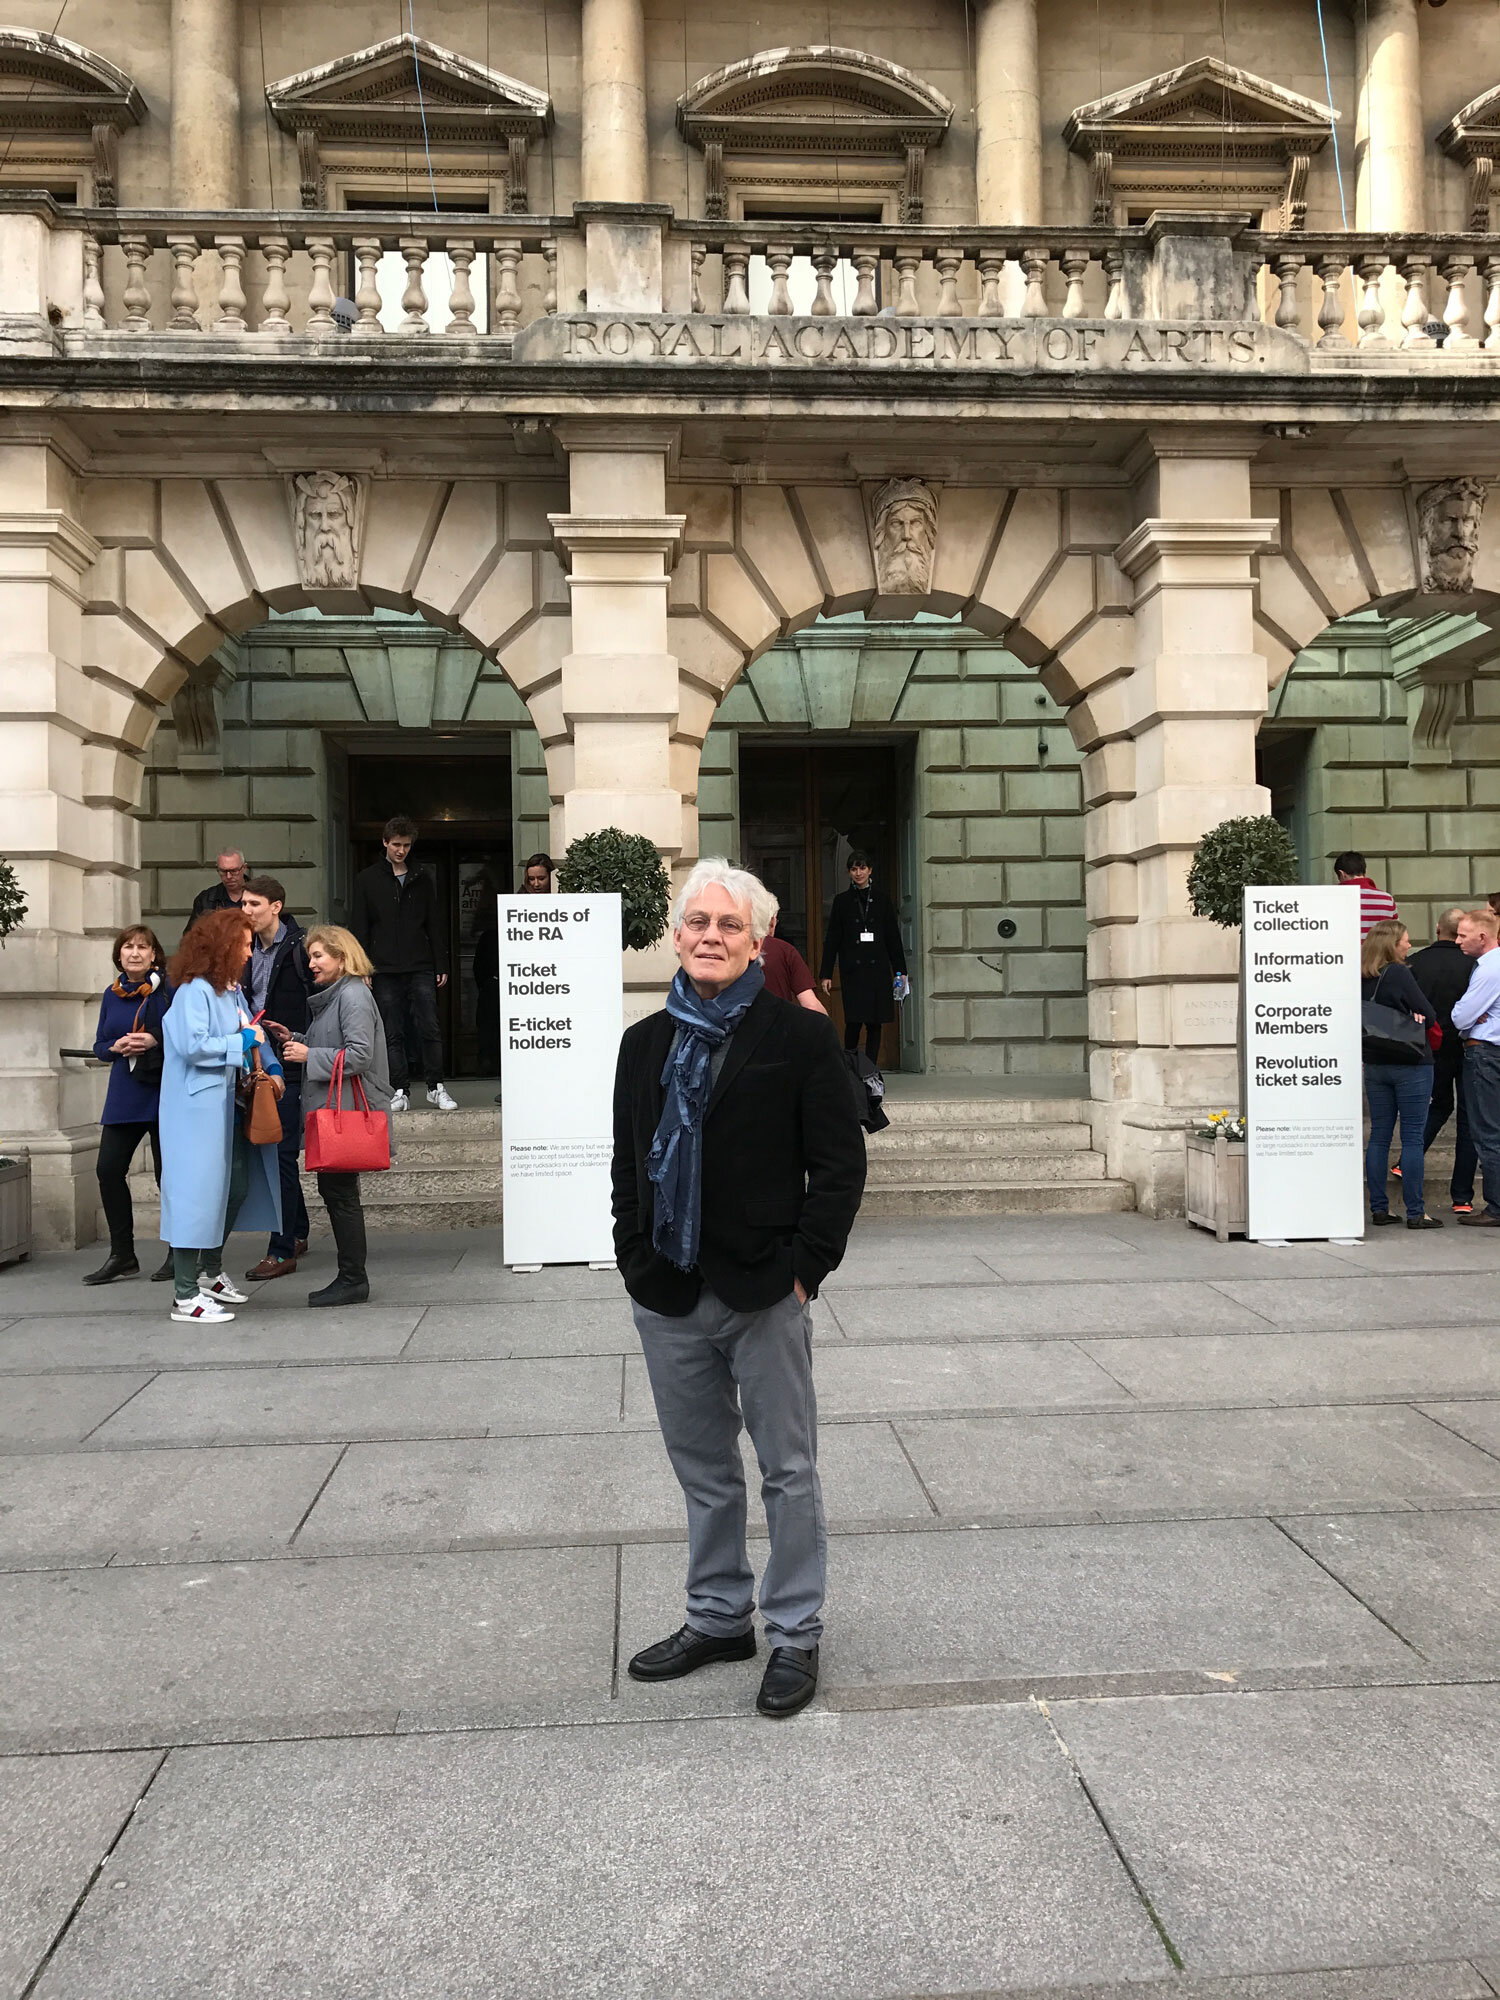  In front of the Royal Academy, 2019 